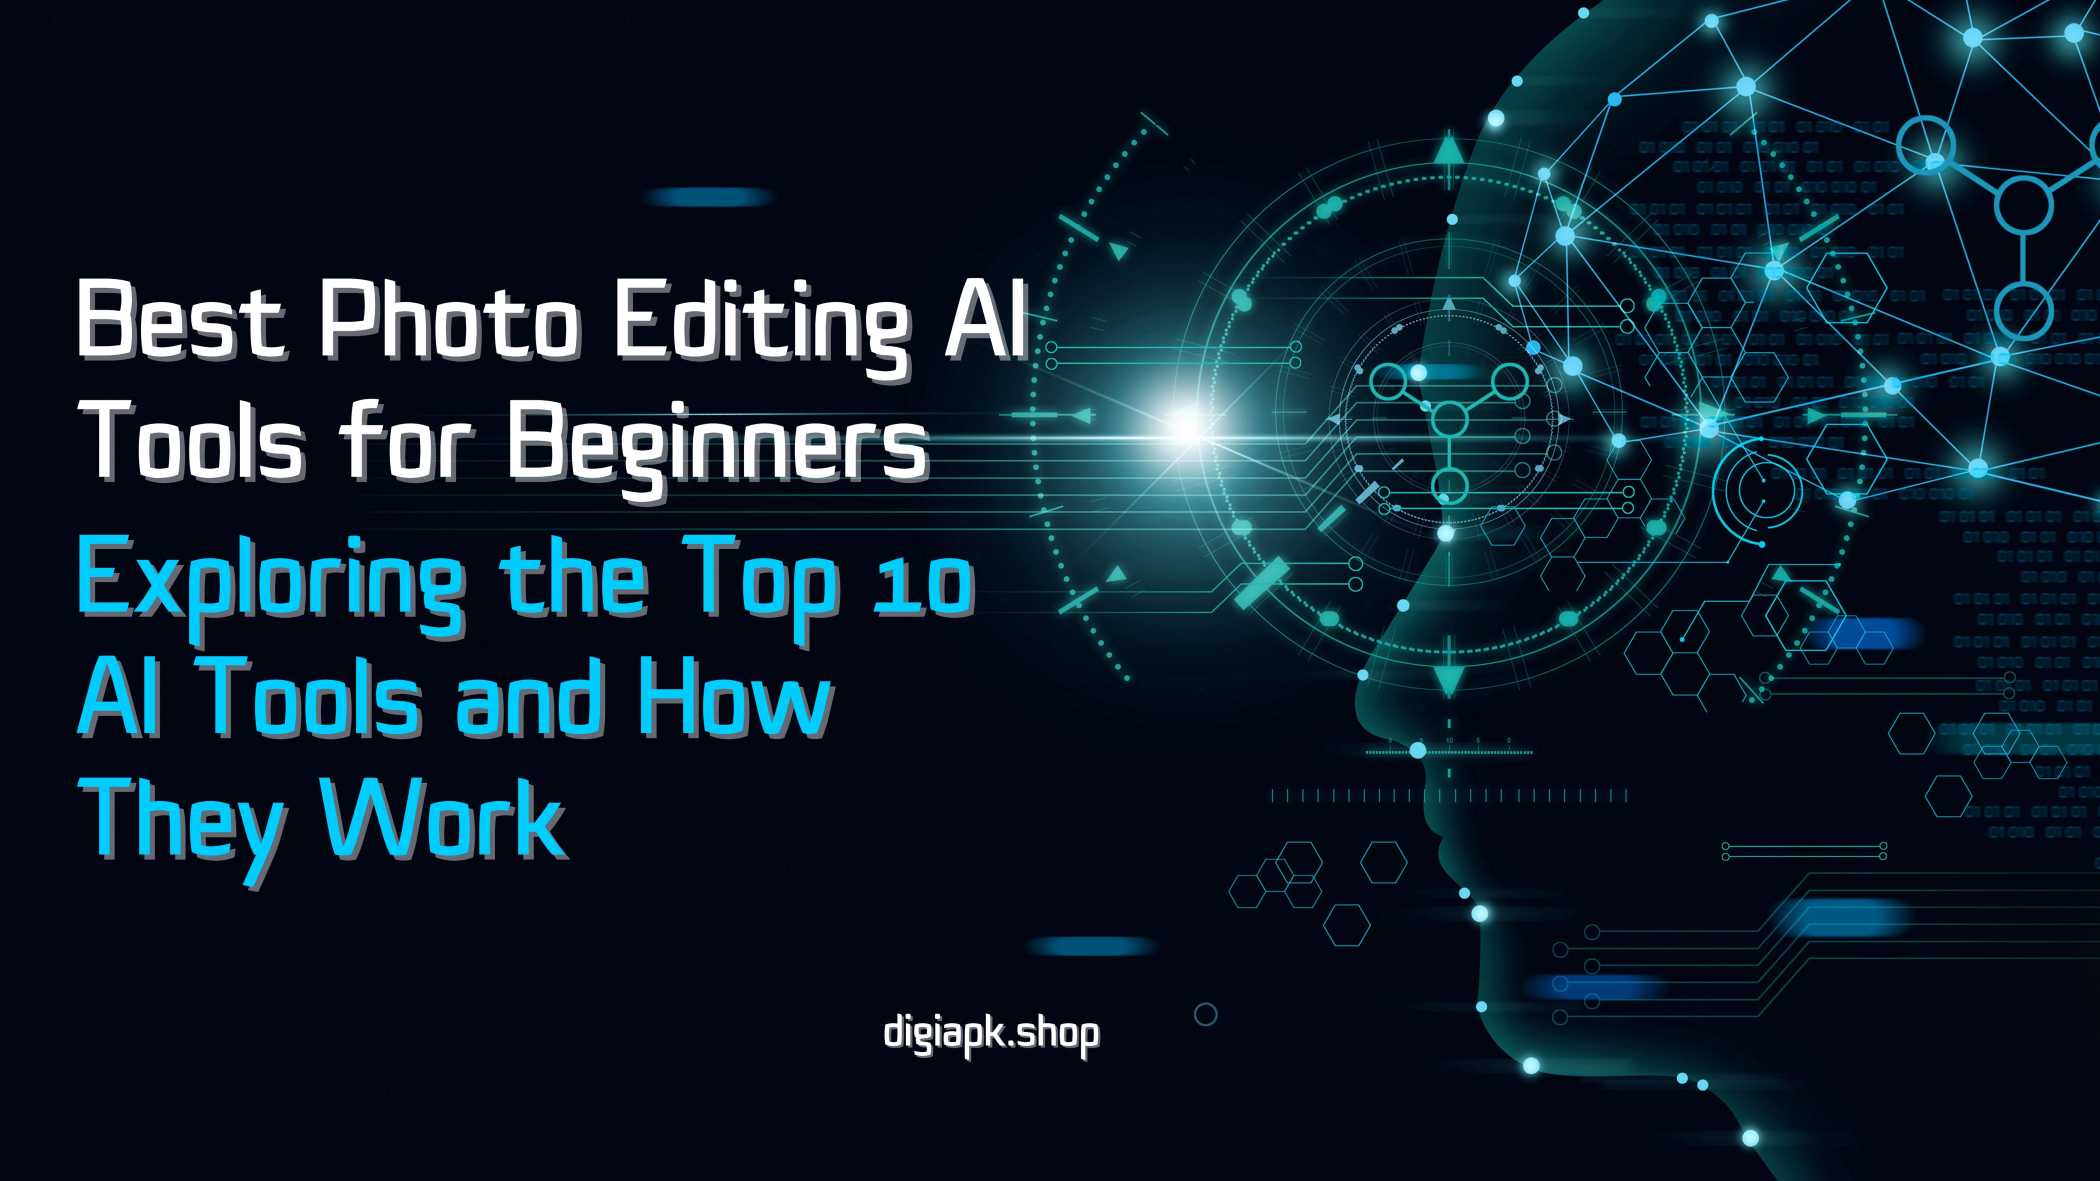 Best Photo Editing AI Tools for Beginners: Exploring the Top 10 AI Tools and How They Work